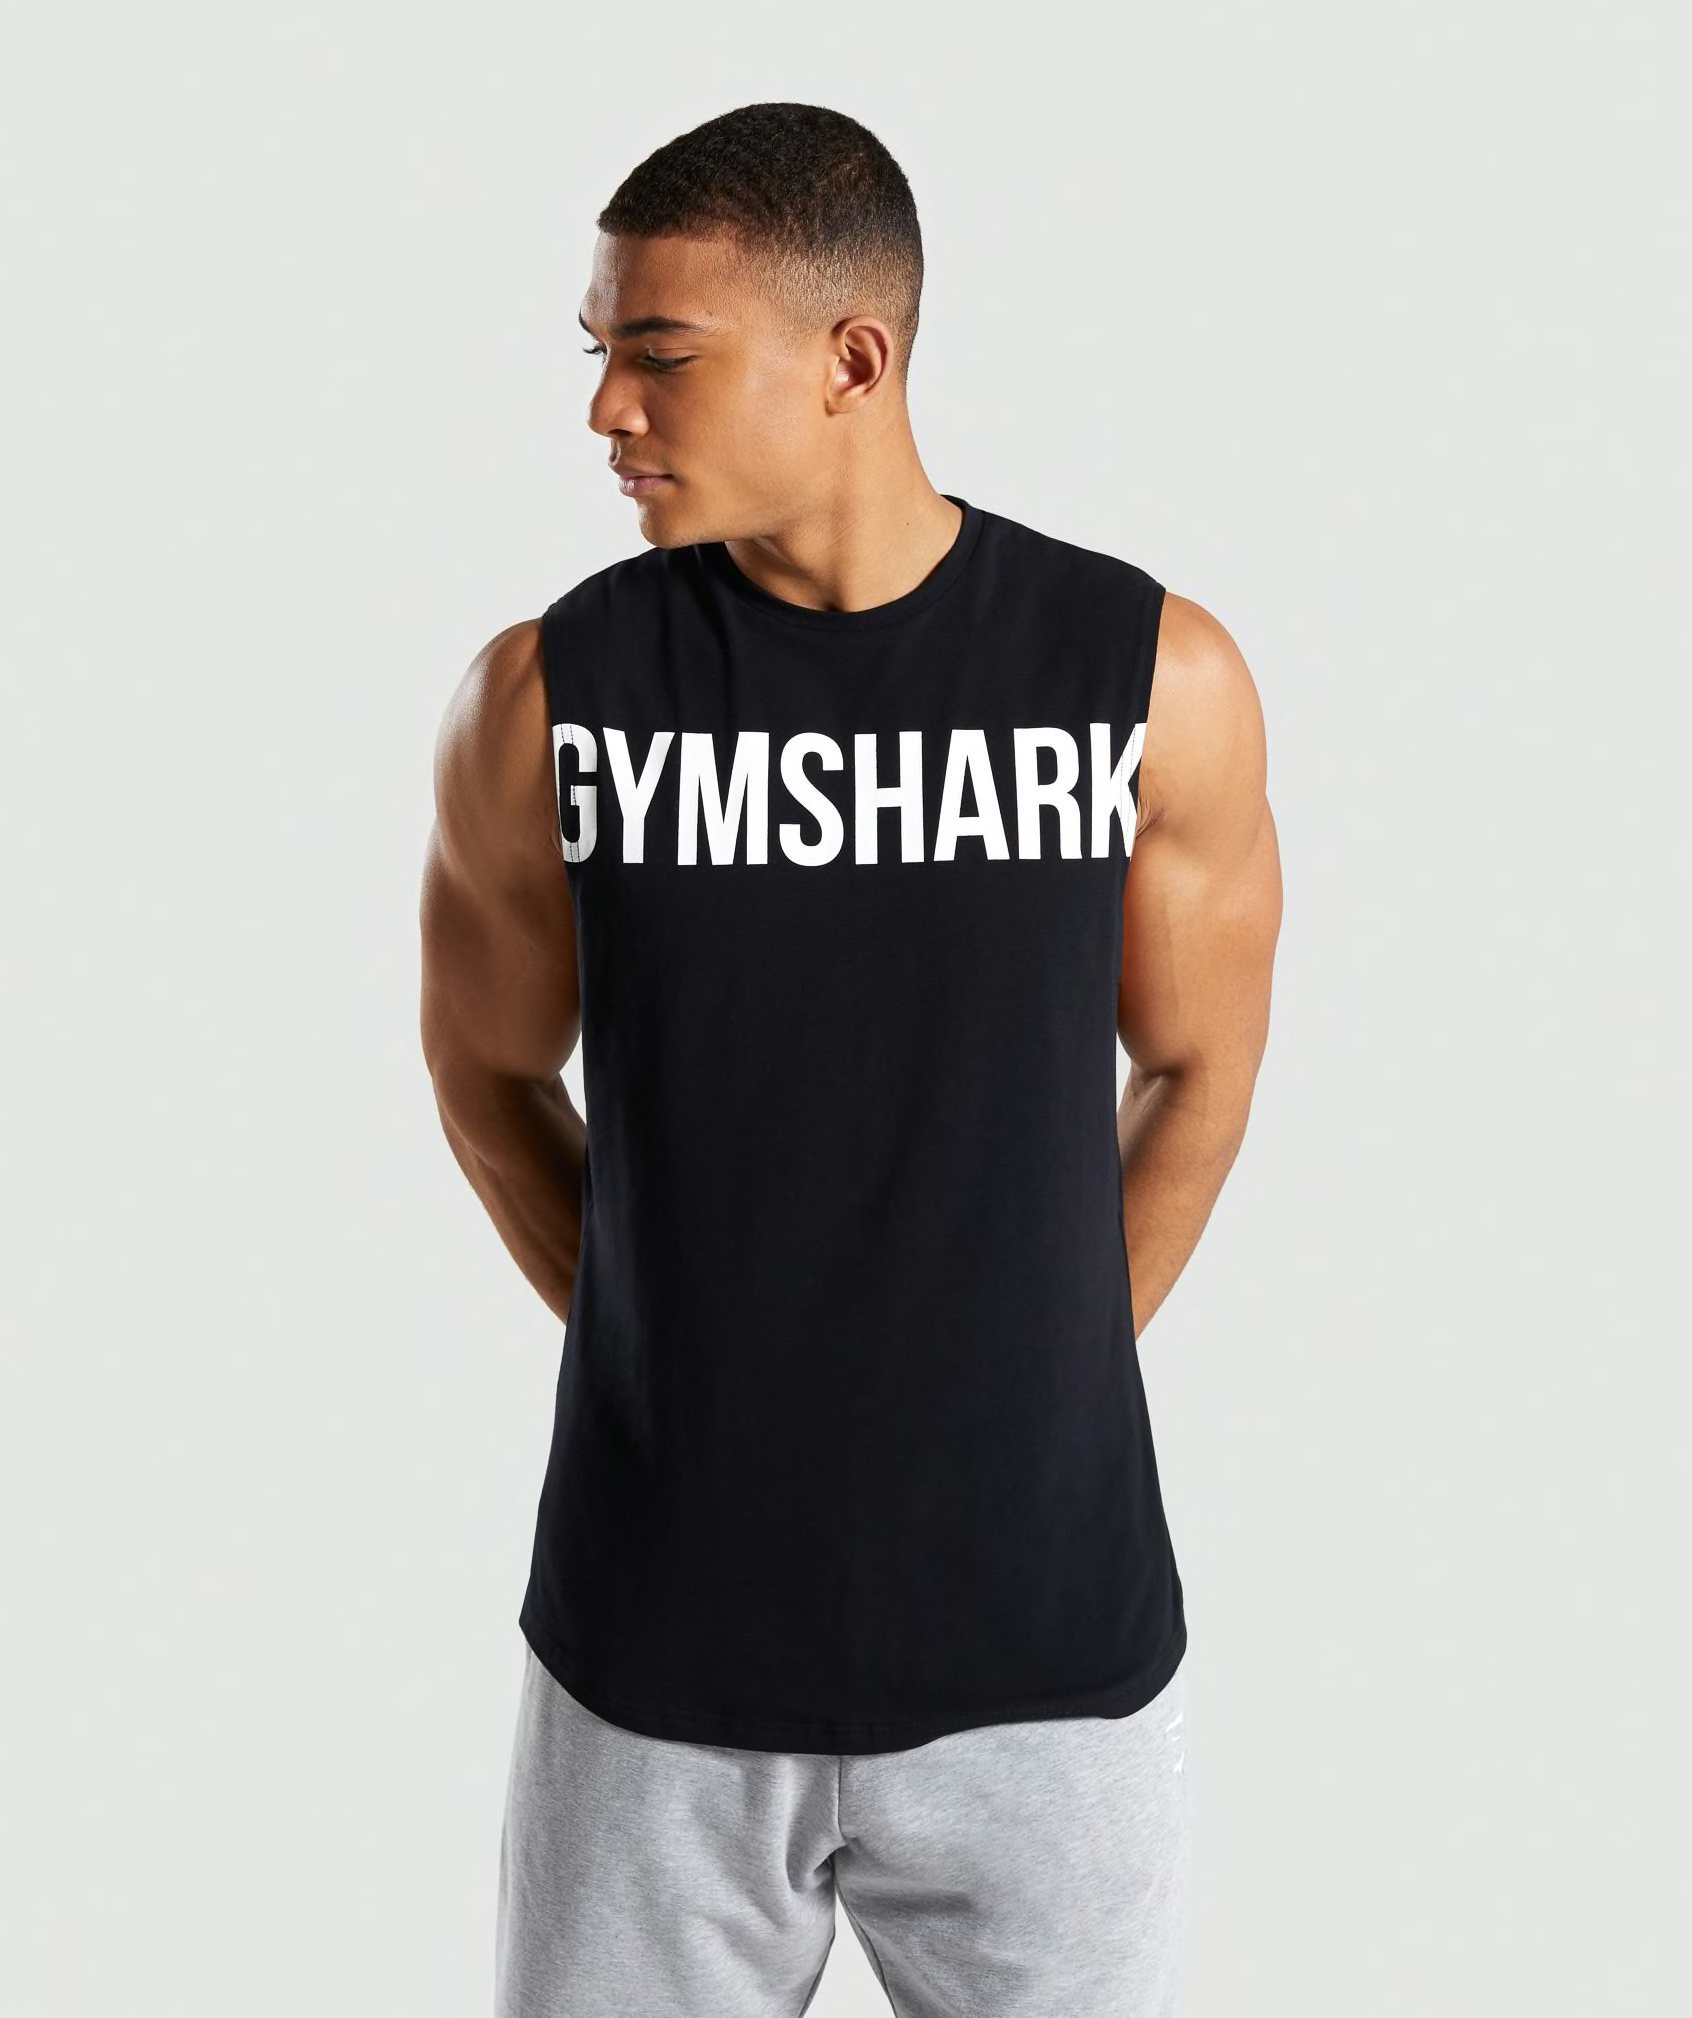 Looking for similar length tanks/sleeveless shirts from other